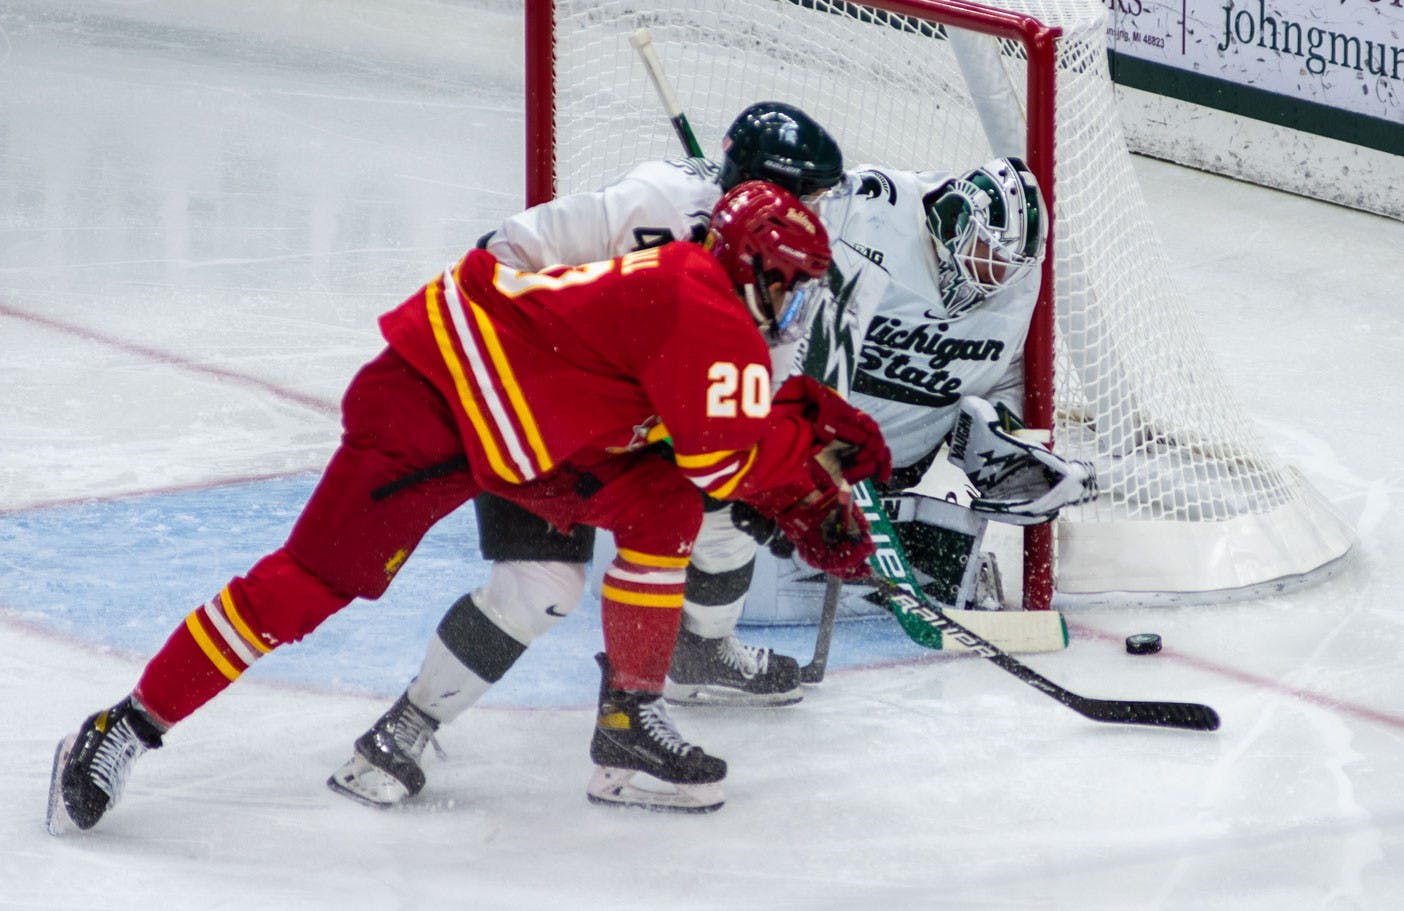 <p>Senior goaltender Drew DeRidder (1) and sophomore right defense Nash Nienhuis (4) prevent a Ferris State shot on goal from going in during the second period. The Spartans beat the Bulldogs, 2-0, in the final minutes of the game on Nov. 11, 2021. </p>